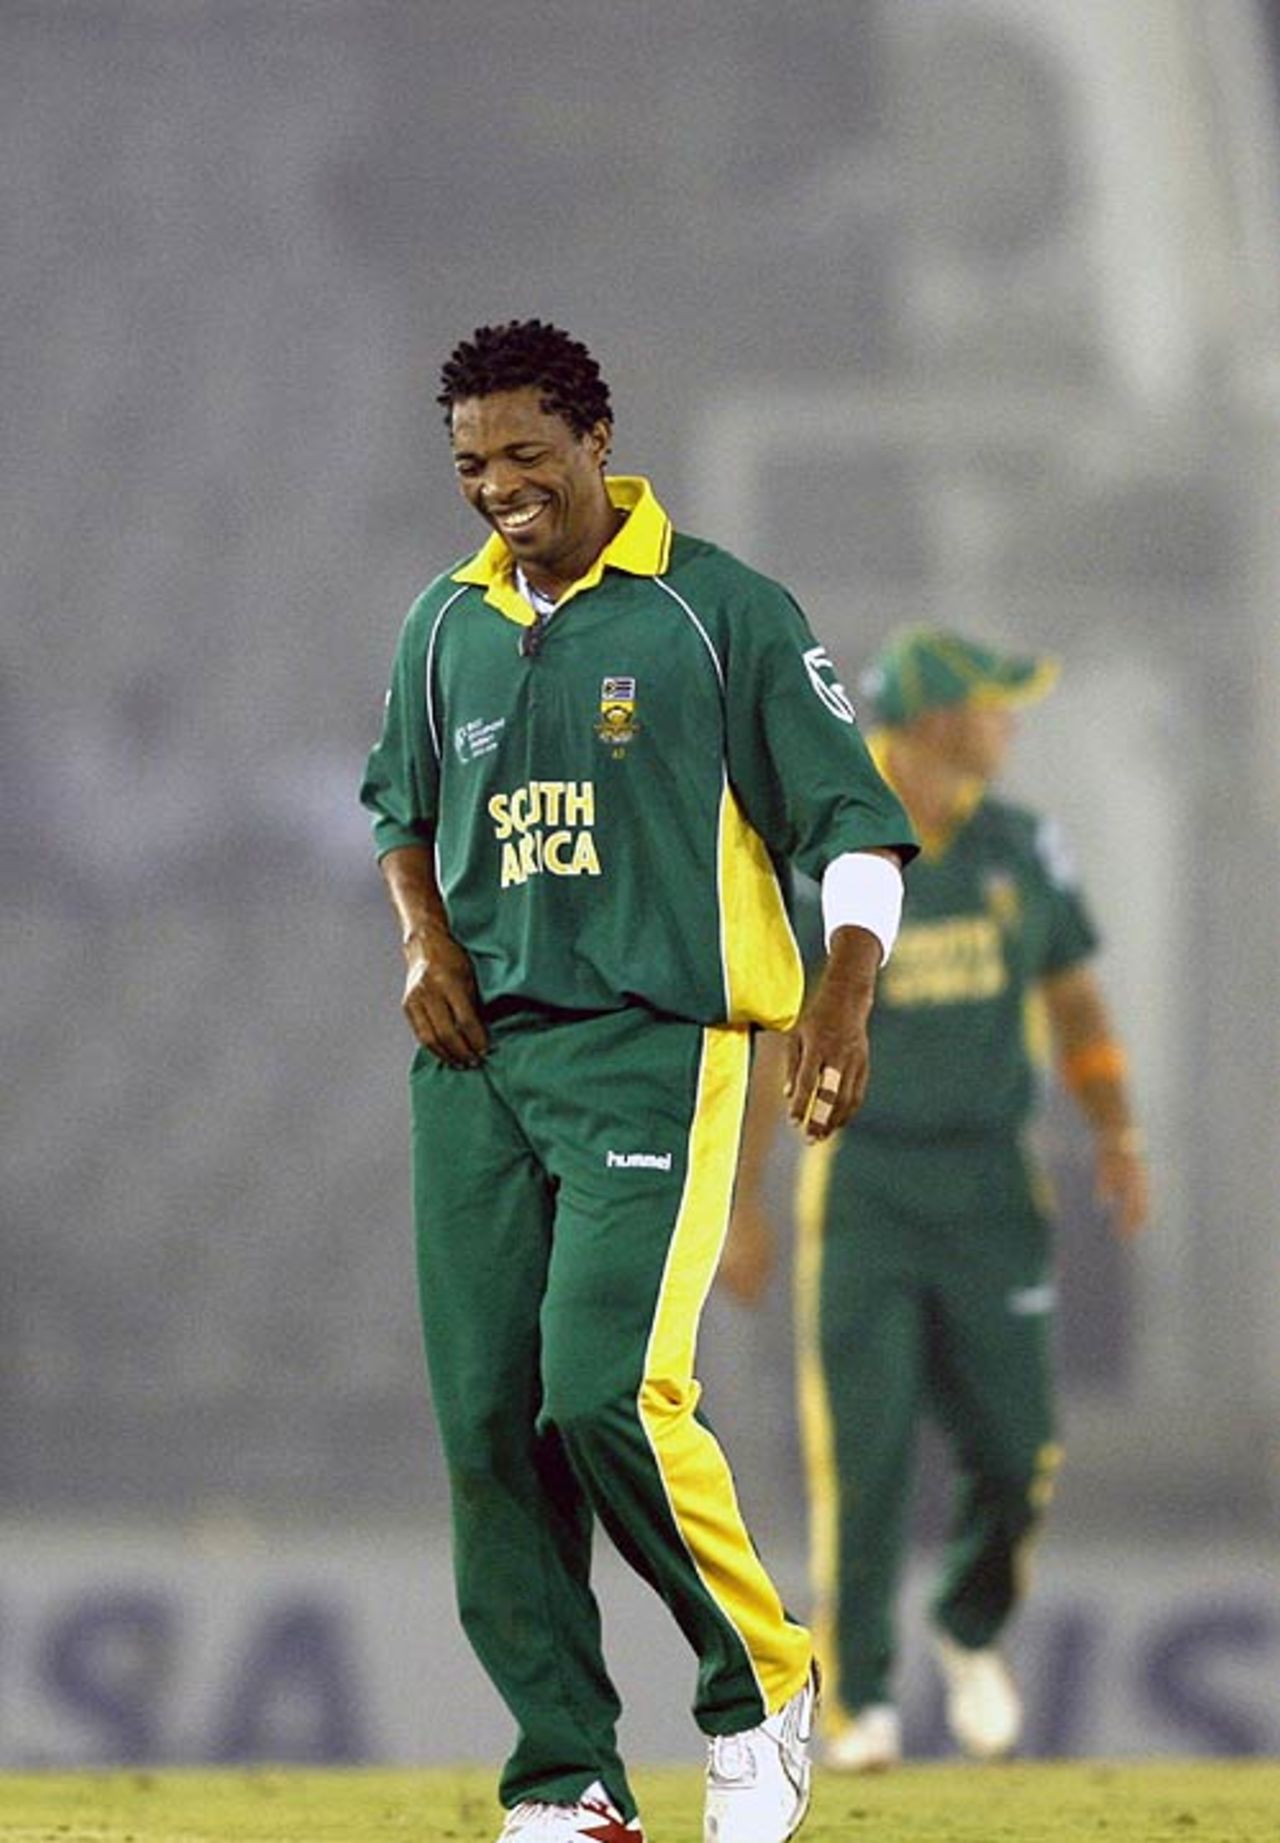 Makhaya Ntini had a productive evening with the ball, Champions Trophy, 16th match, Mohali, October 27, 2006